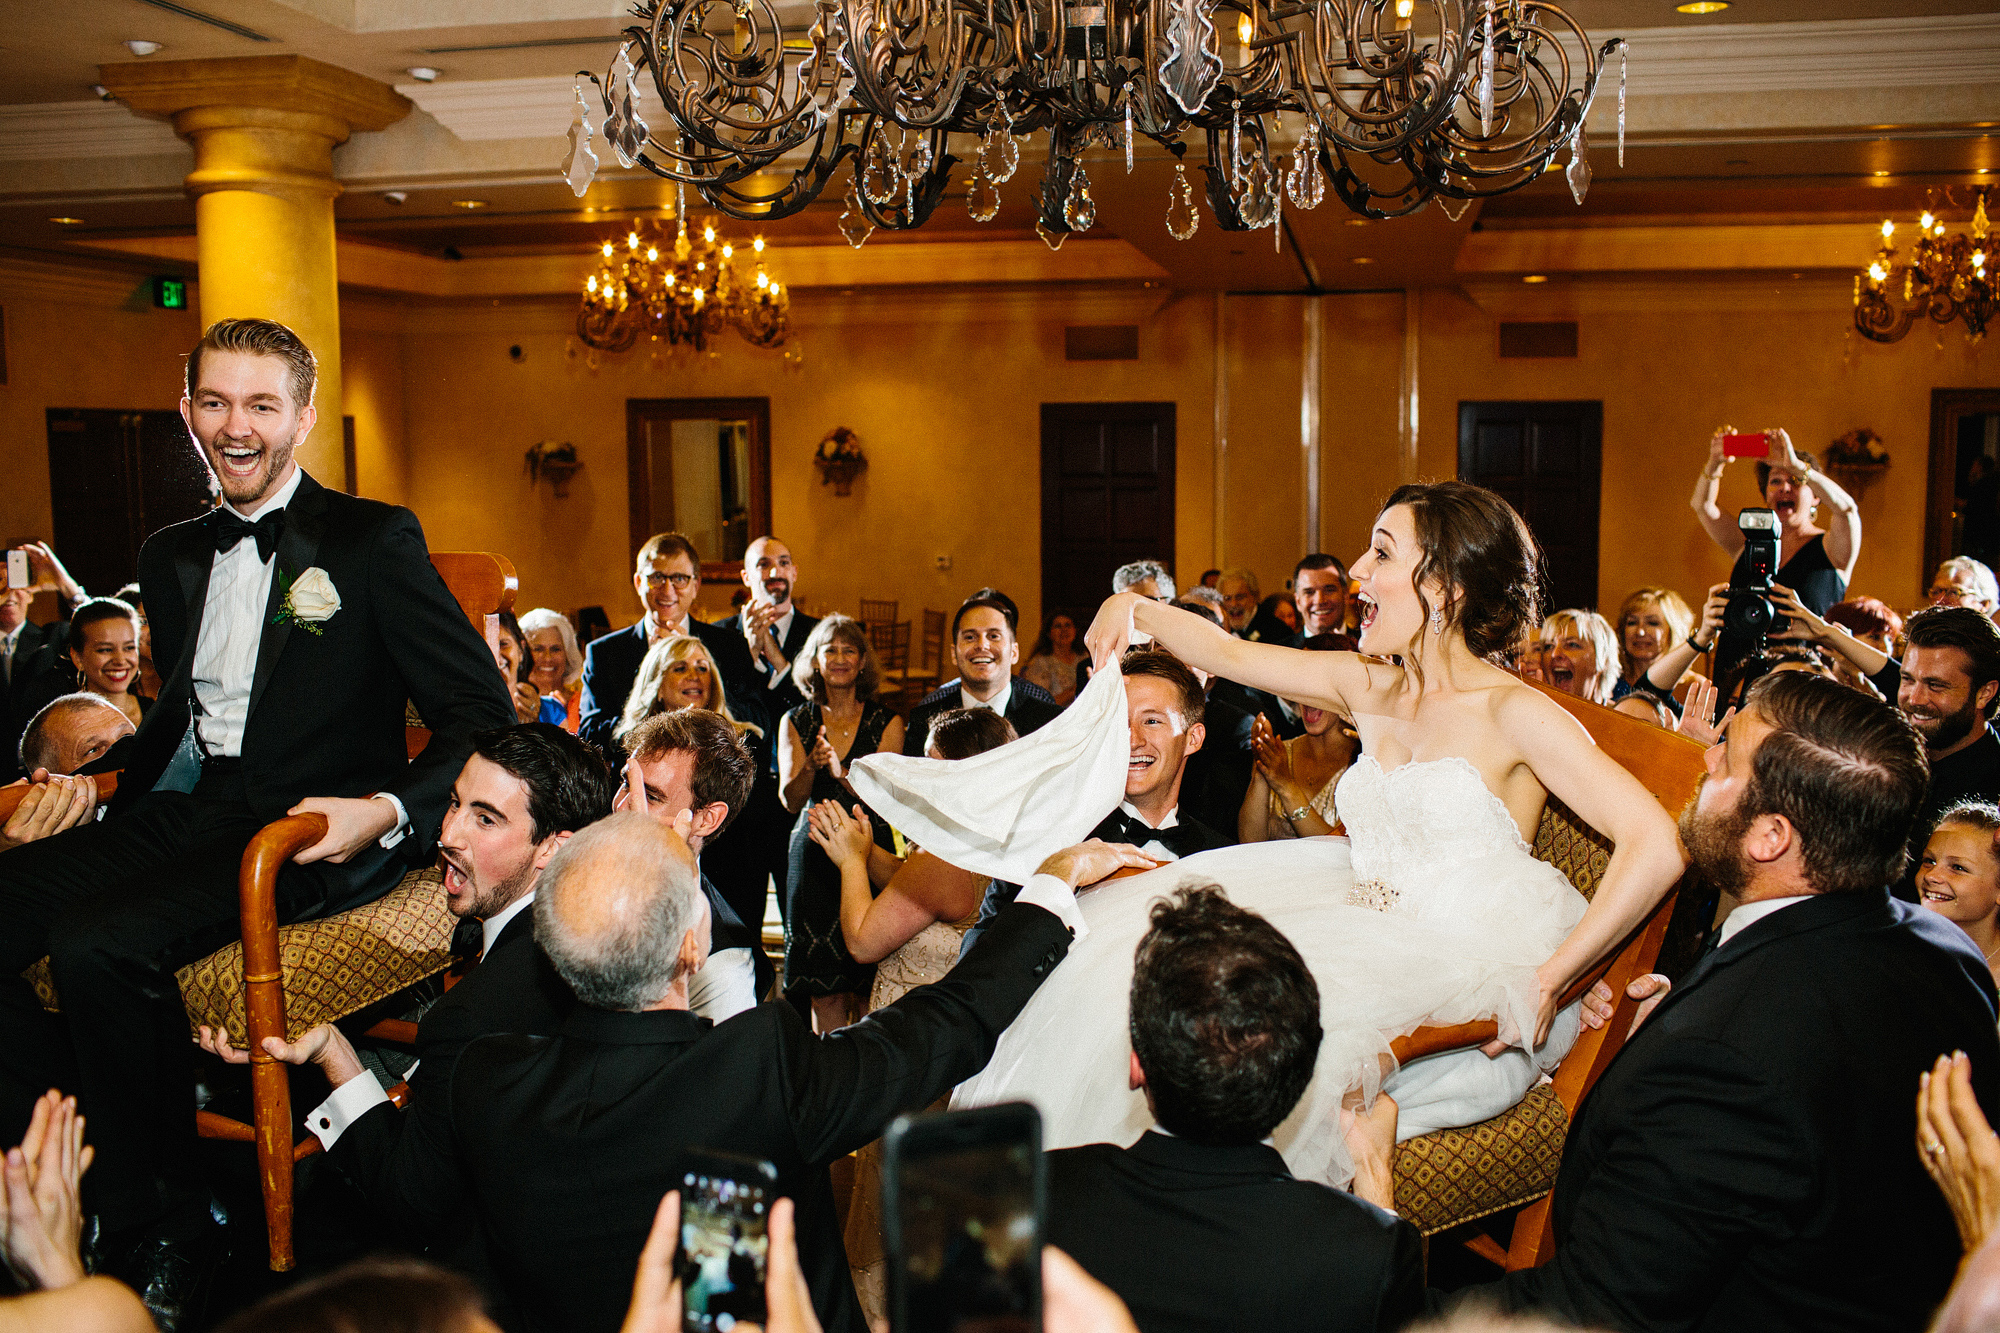 The bride and groom being lifted on chairs. 